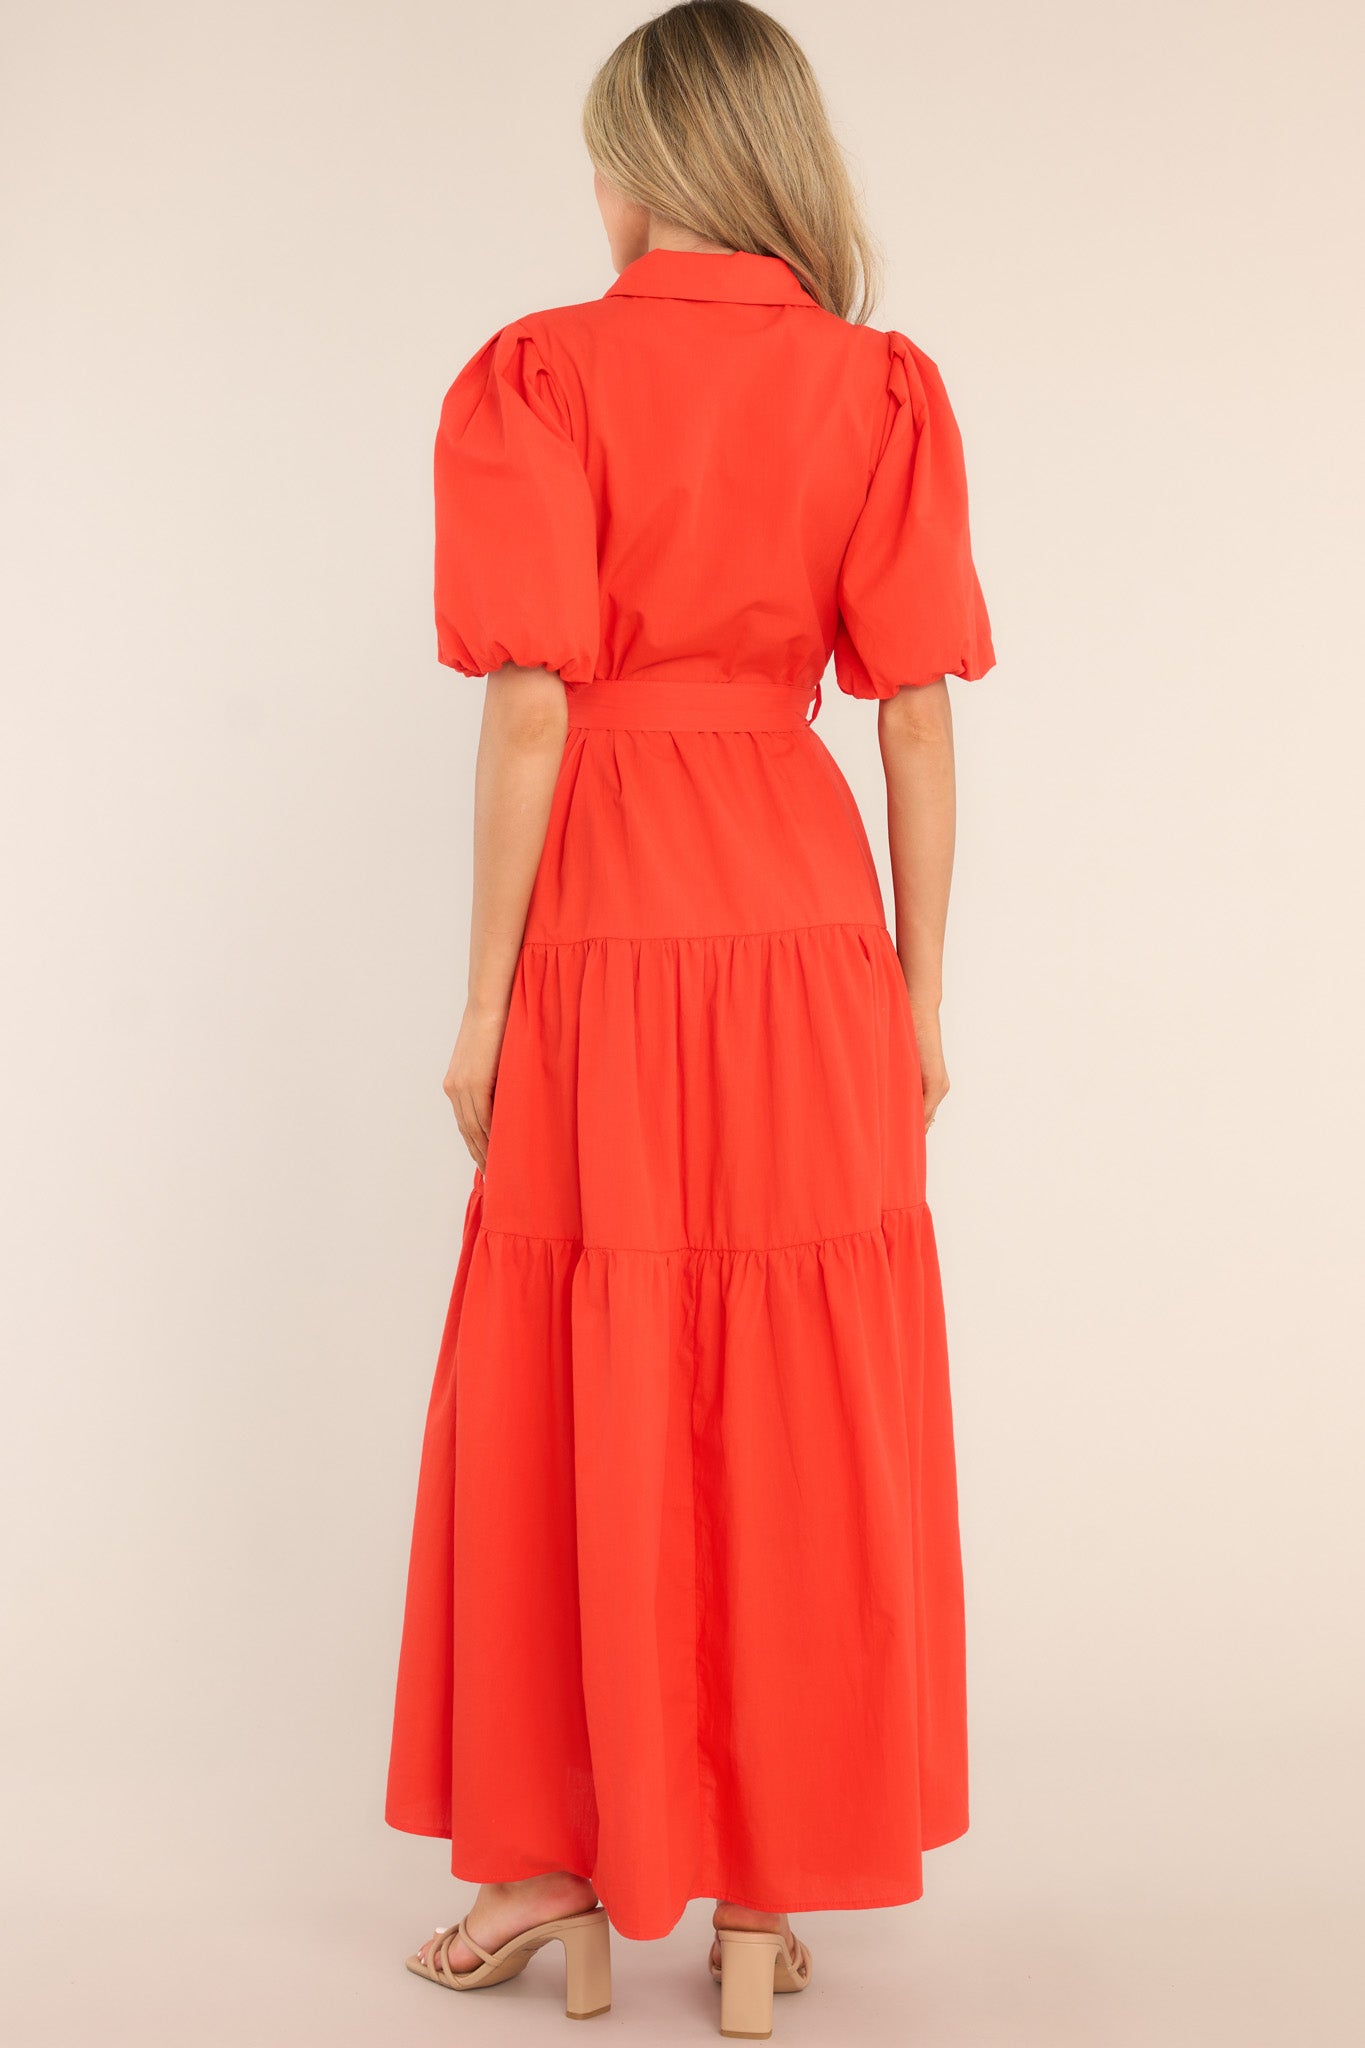 Back view of this dress that features a collared neckline, functional buttons down the front, belt loops, a self-tie belt, and short puff sleeves with elastic cuffs.